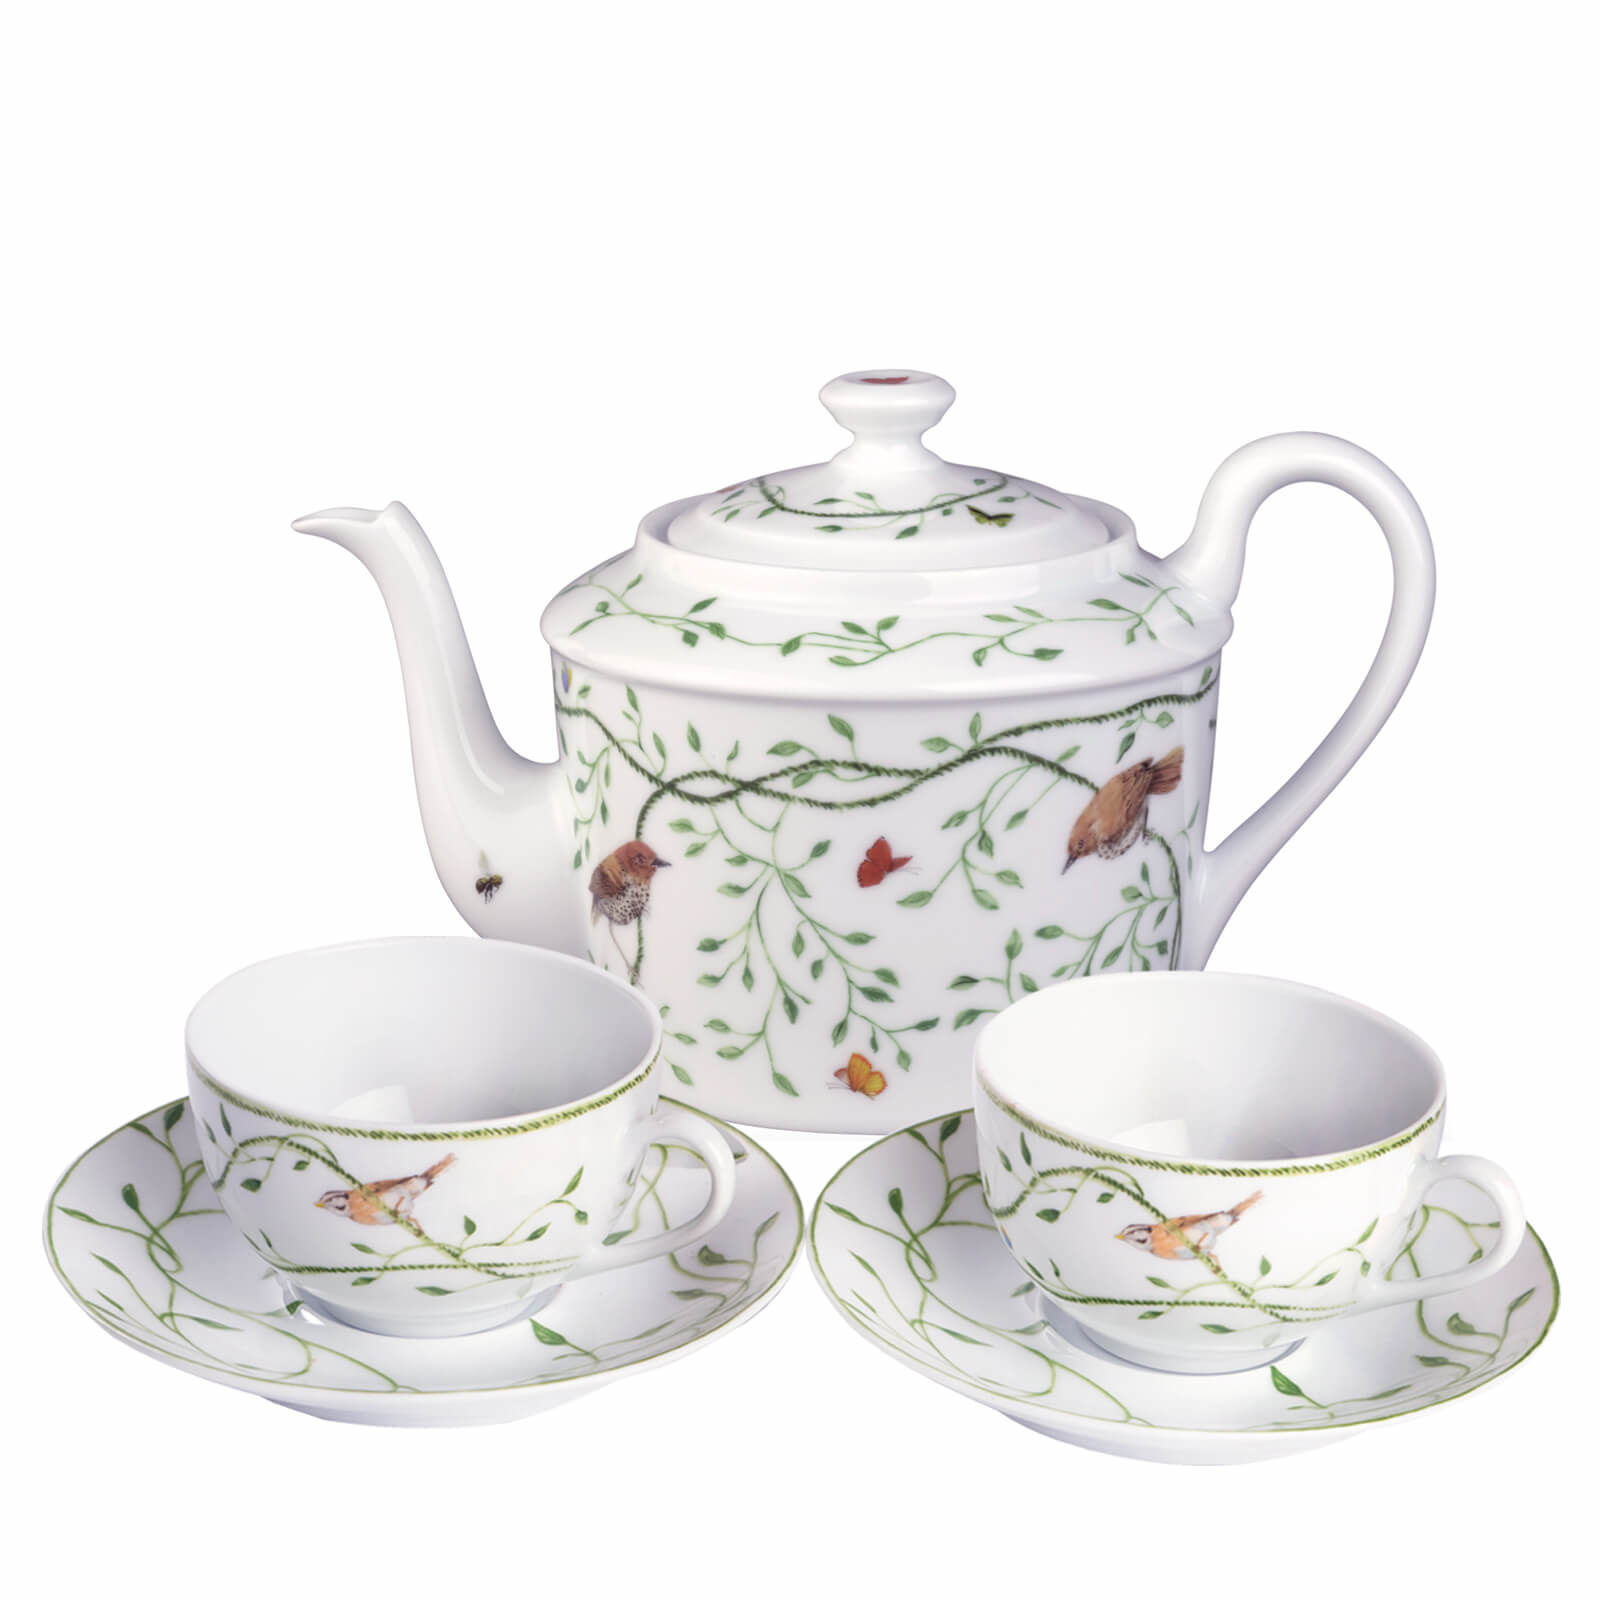 Set of two tea cups, saucers and teapot - Eden Being